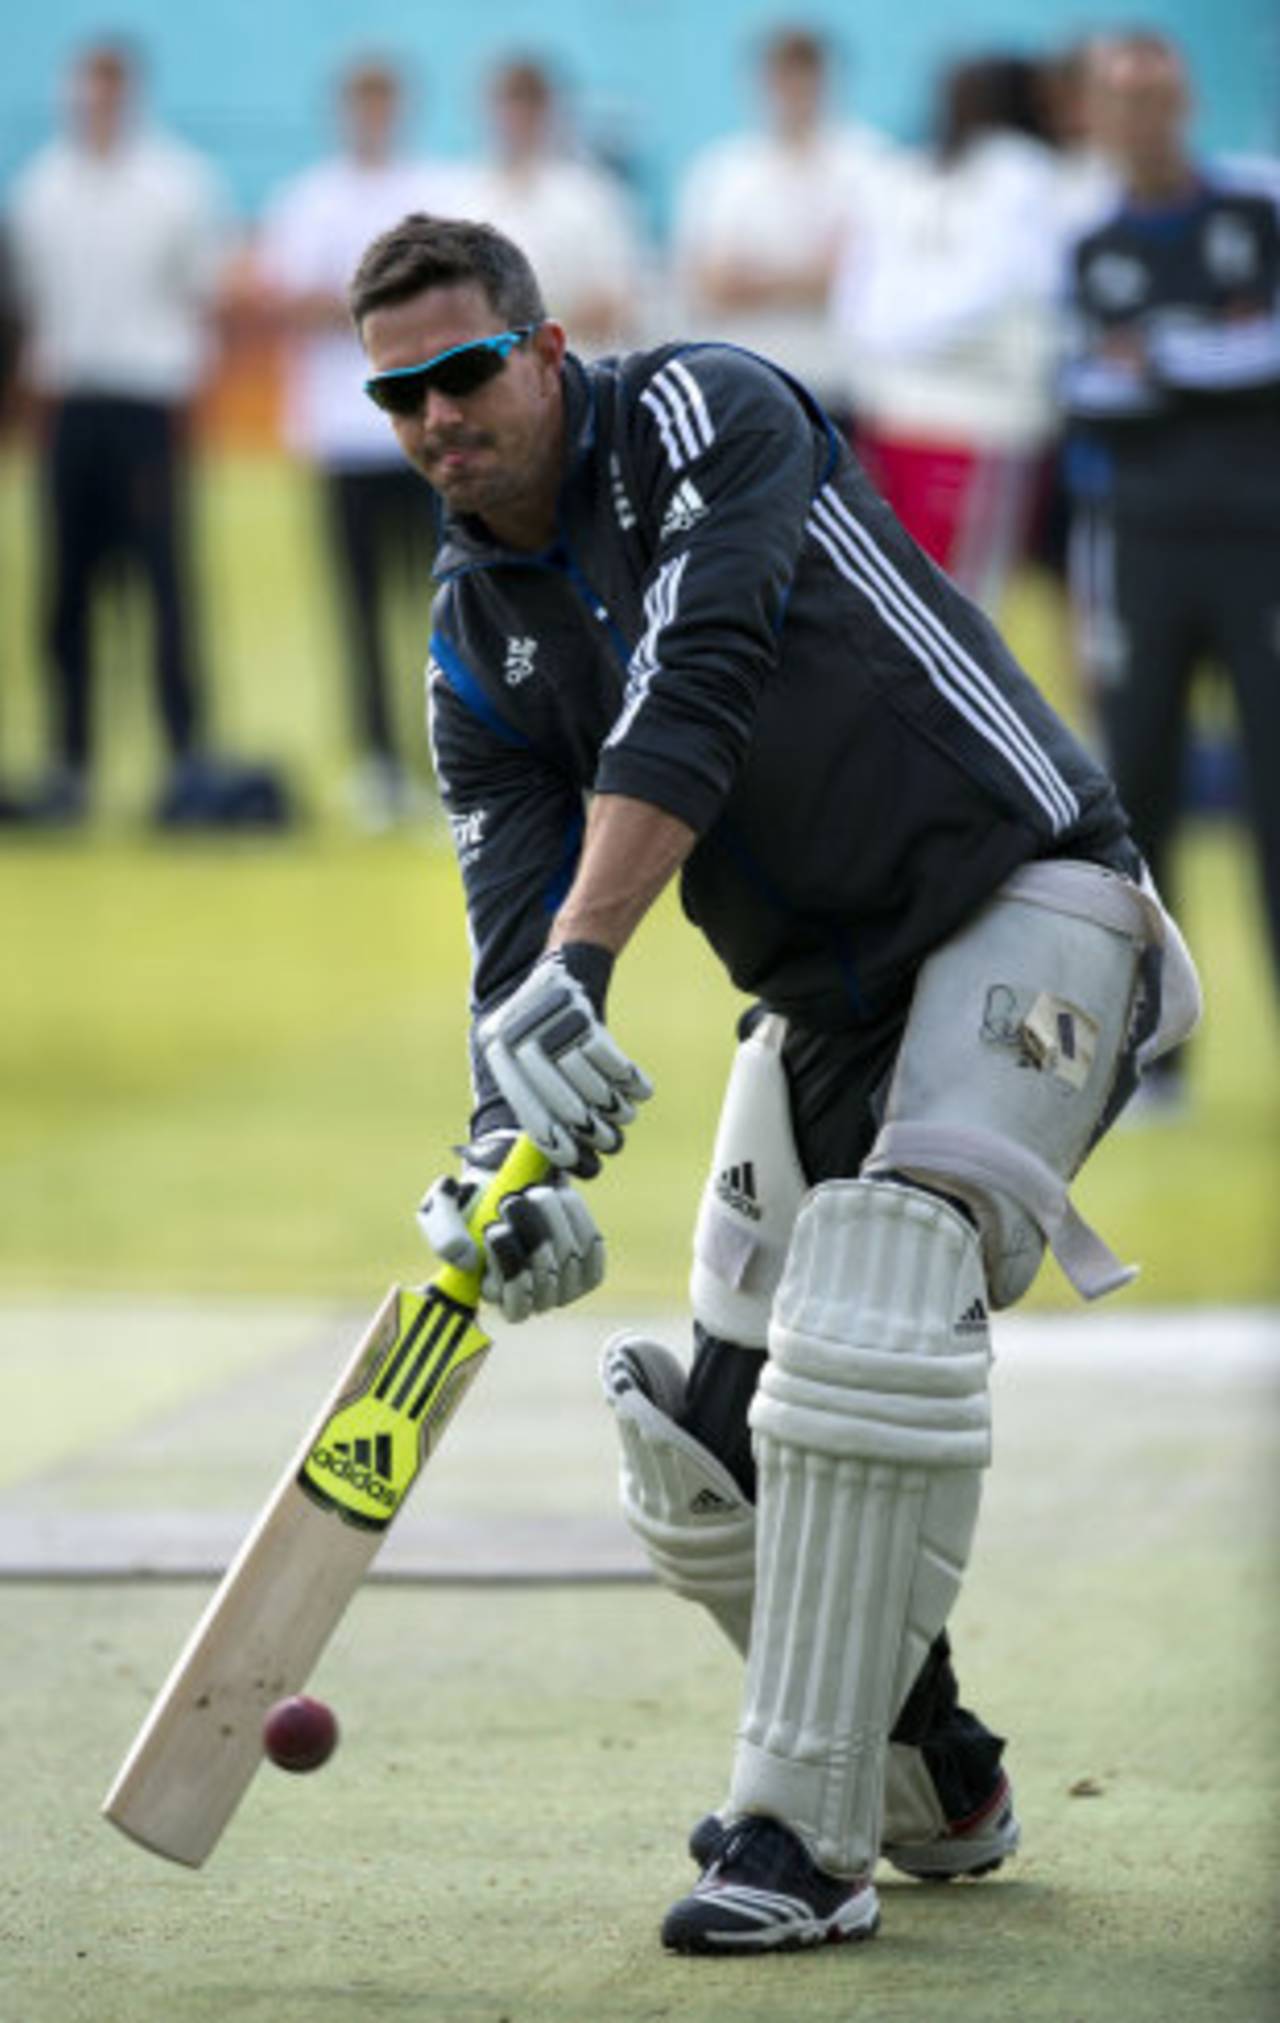 Kevin Pietersen has a bat on the eve of the first Test, Lord's, May 16, 2012